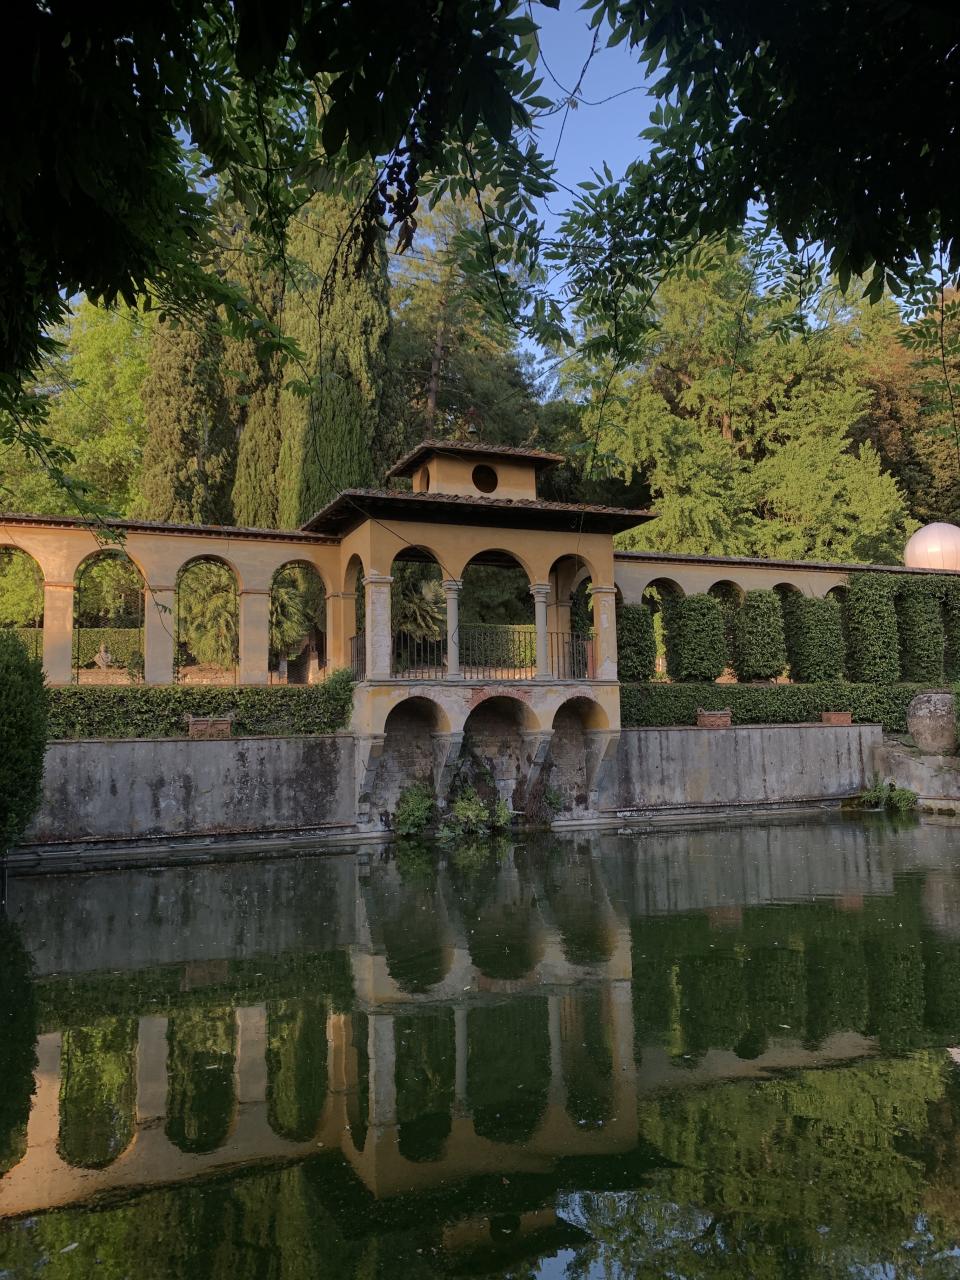 <h1 class="title">A tranquil scene at Villa Palmieri, the backdrop to the Givenchy show</h1><cite class="credit">Photo: Justin Fernandez</cite>